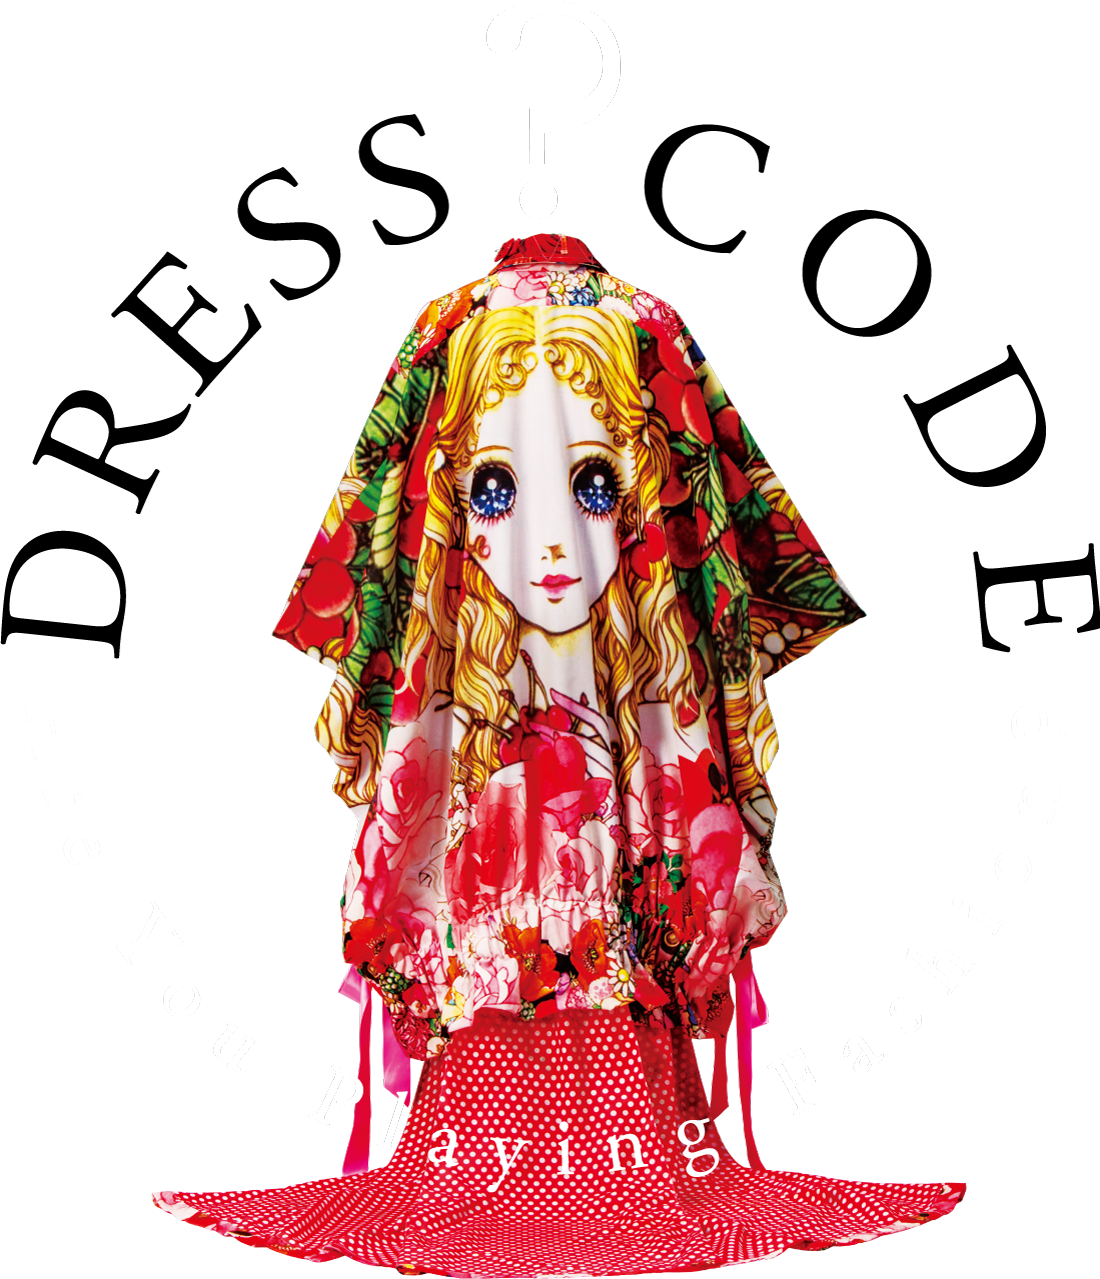 Dress Code: Are You Playing Fashion? keyvisual